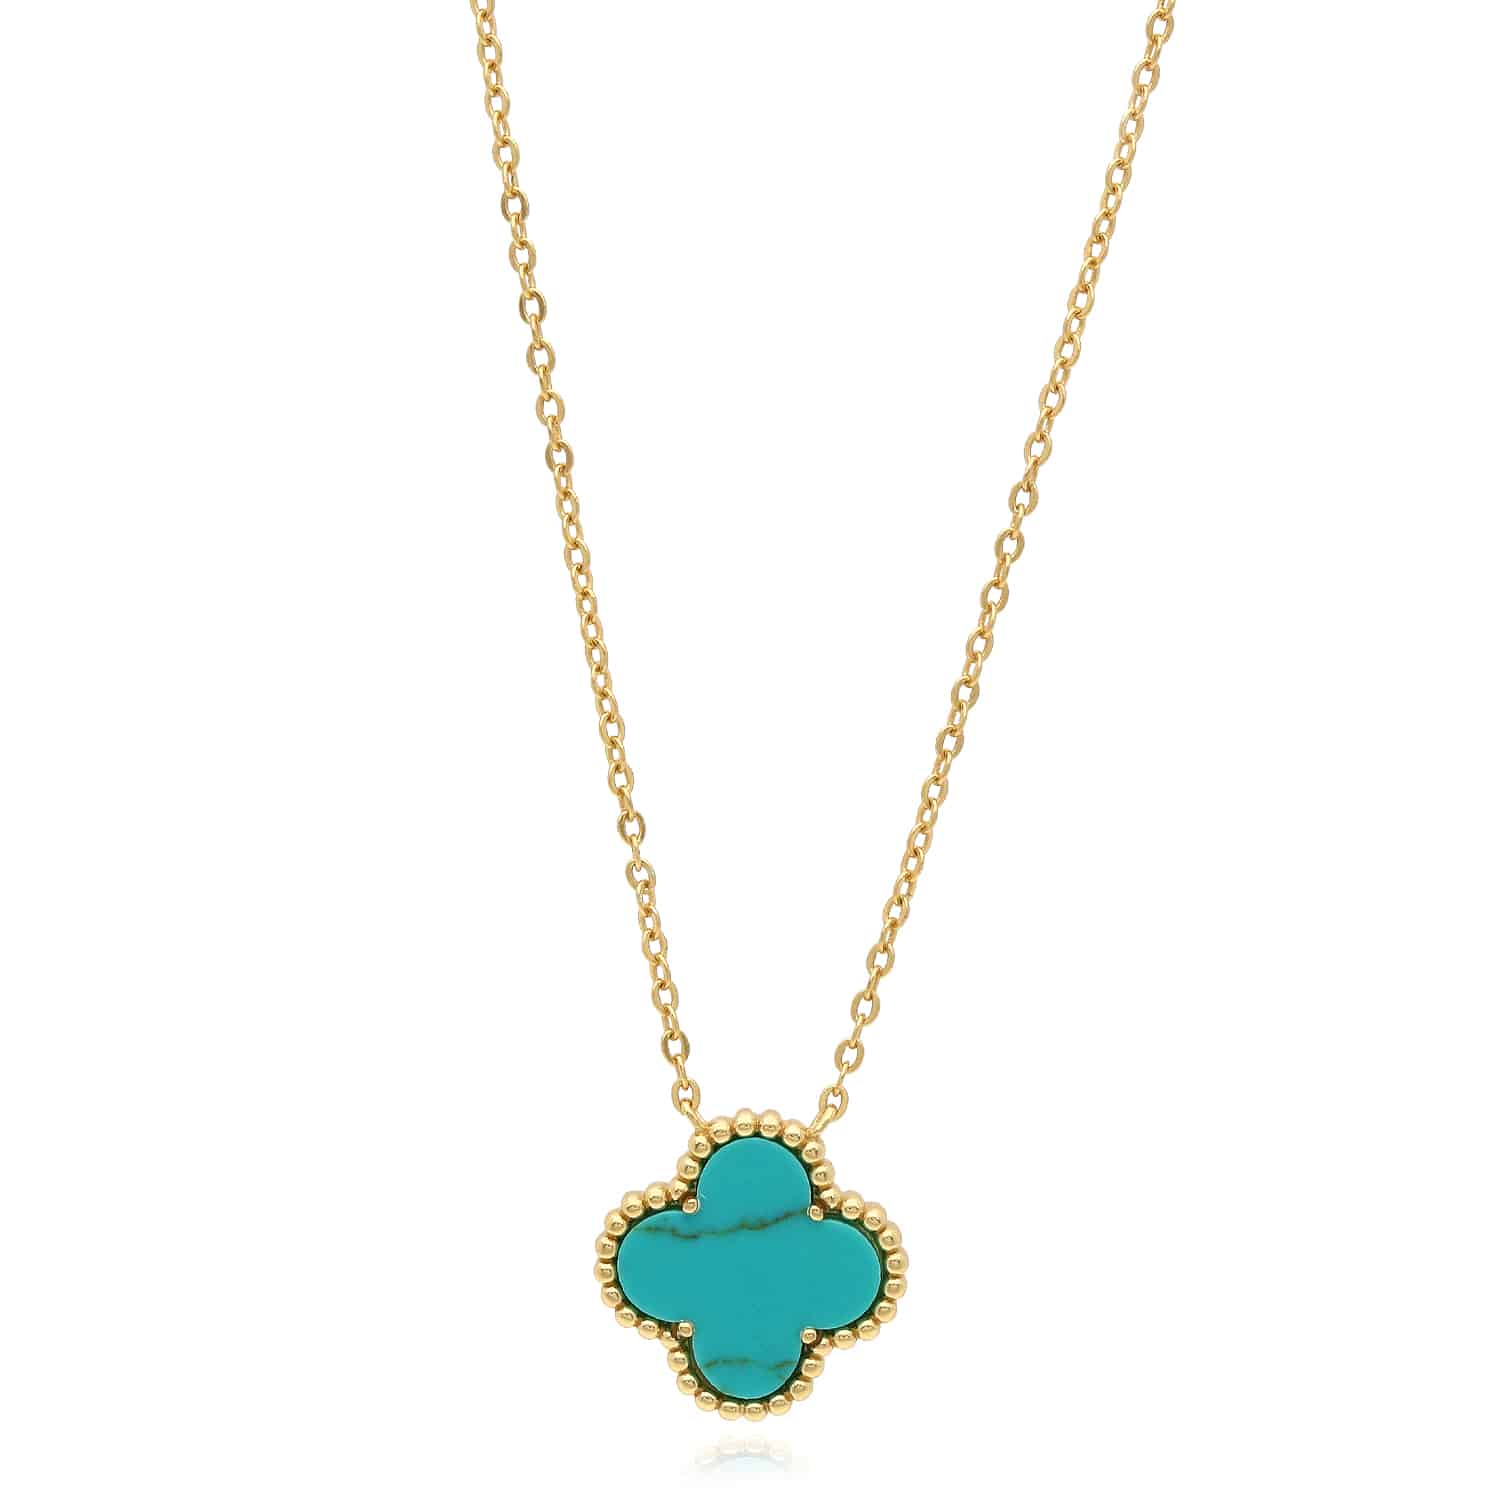 Yellow Gold Over Silver Gemstone Clover Leaf Pendant Necklace 16"-18" Adjustable - Turquoise